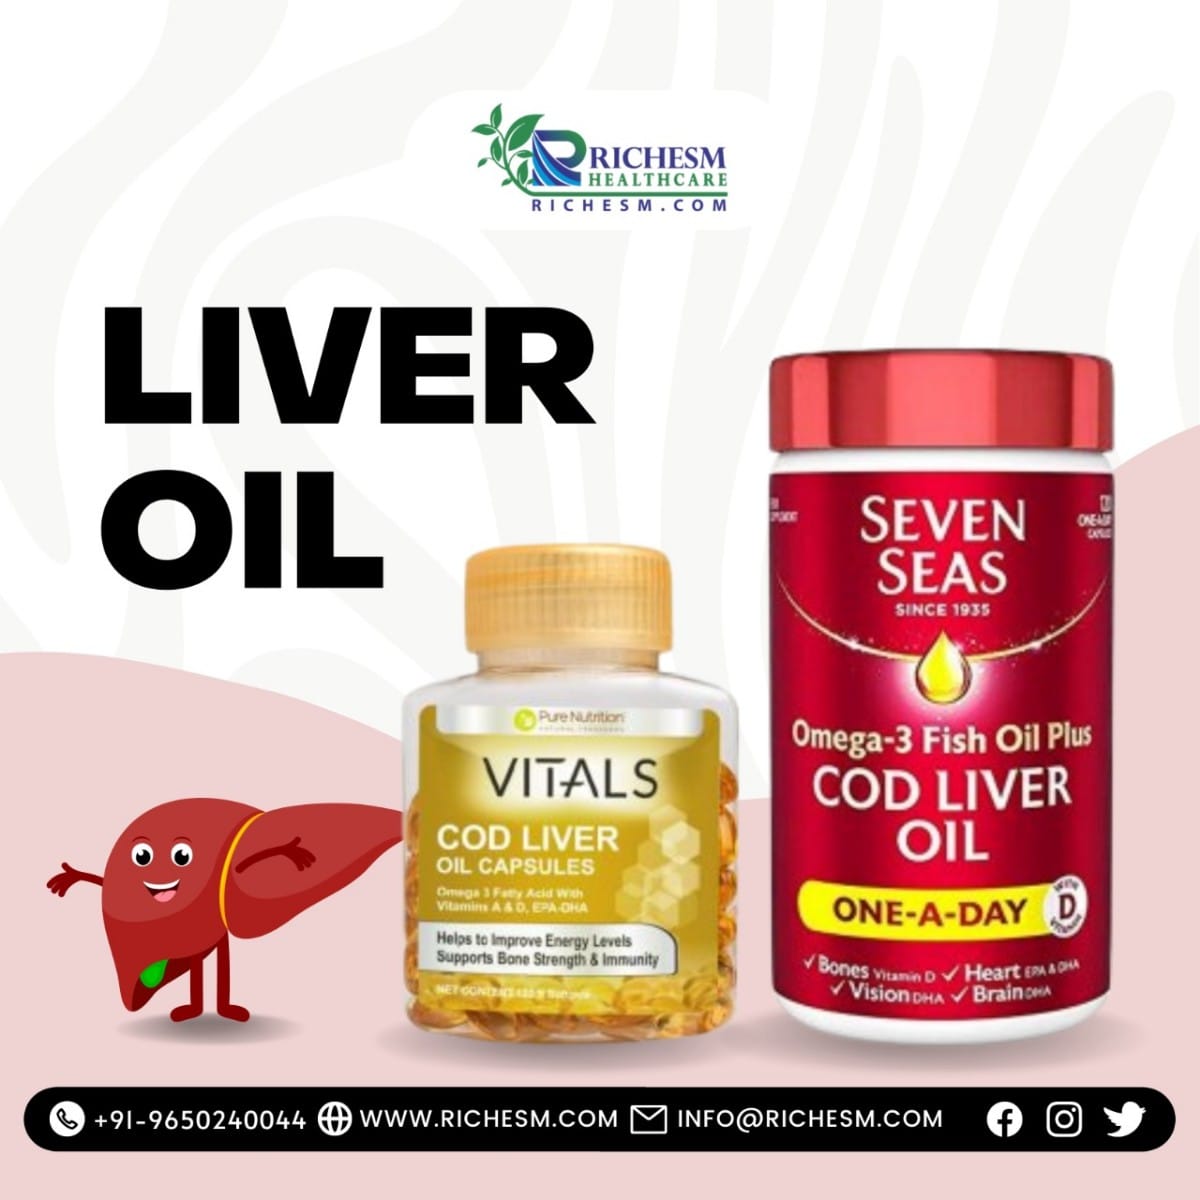 Liver Oil Usage and Benefits Health and Nutrition Liver Oil